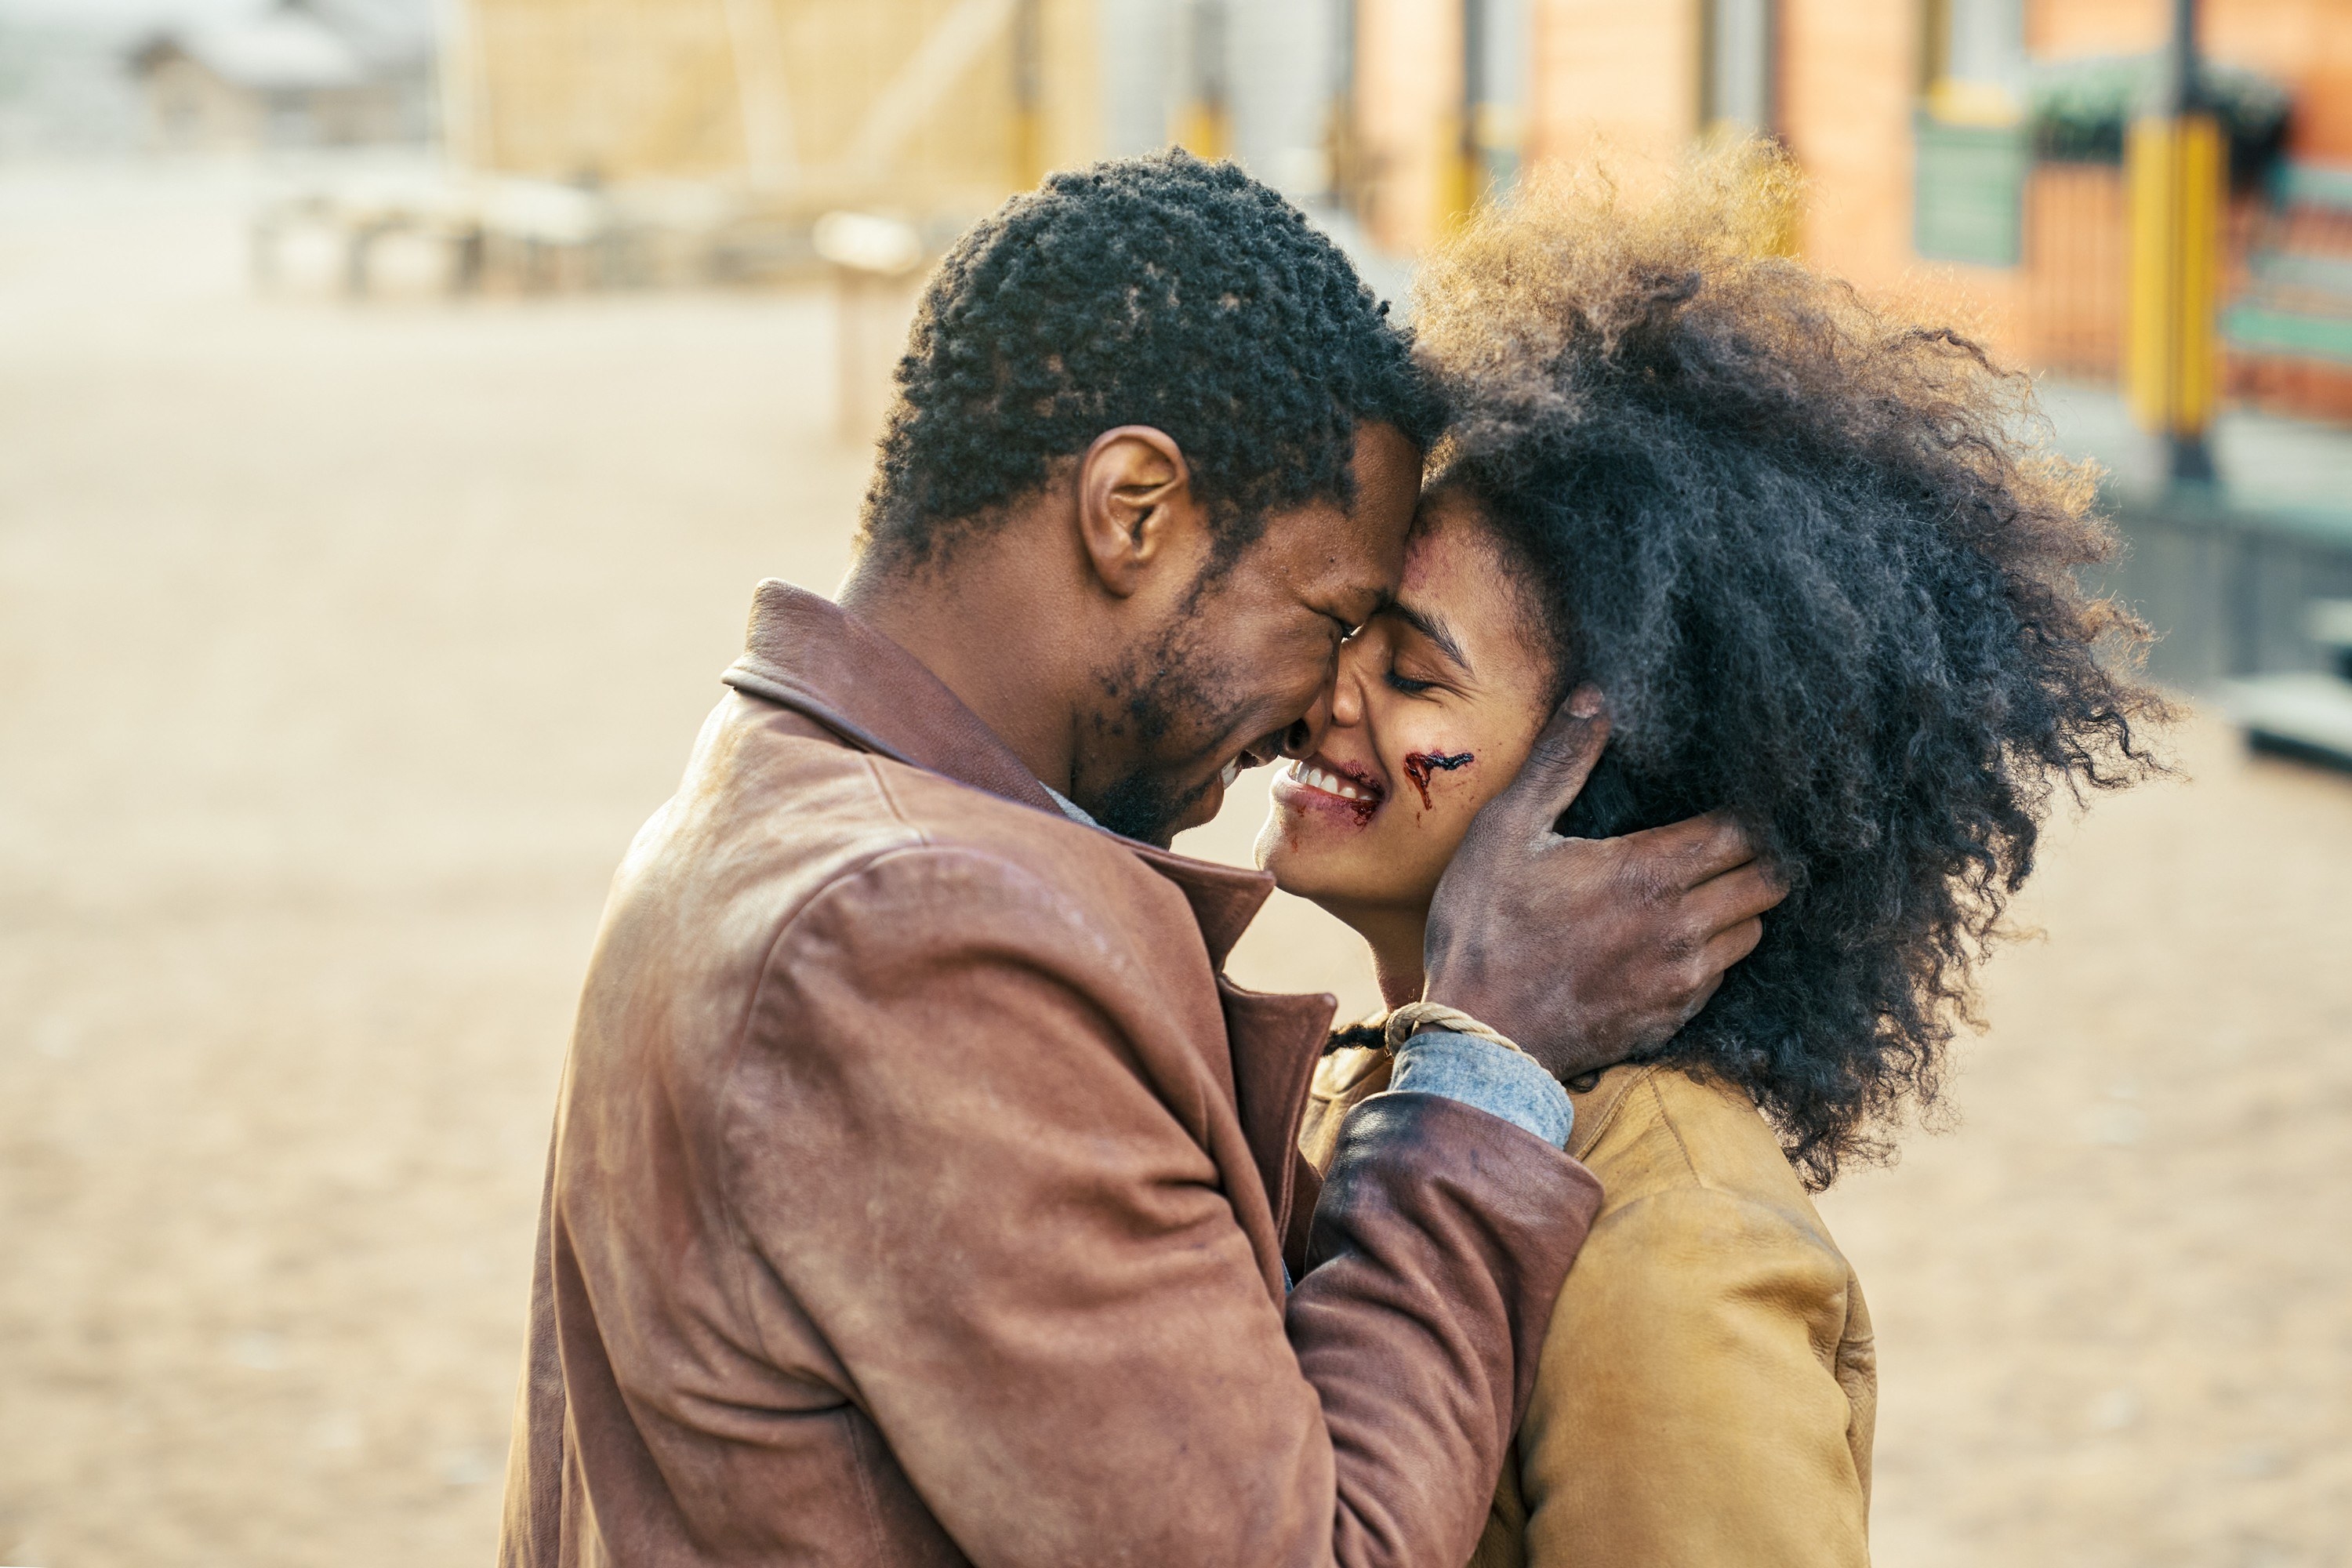 Jonathan Majors and Zazie Beetz smile and put their noses together